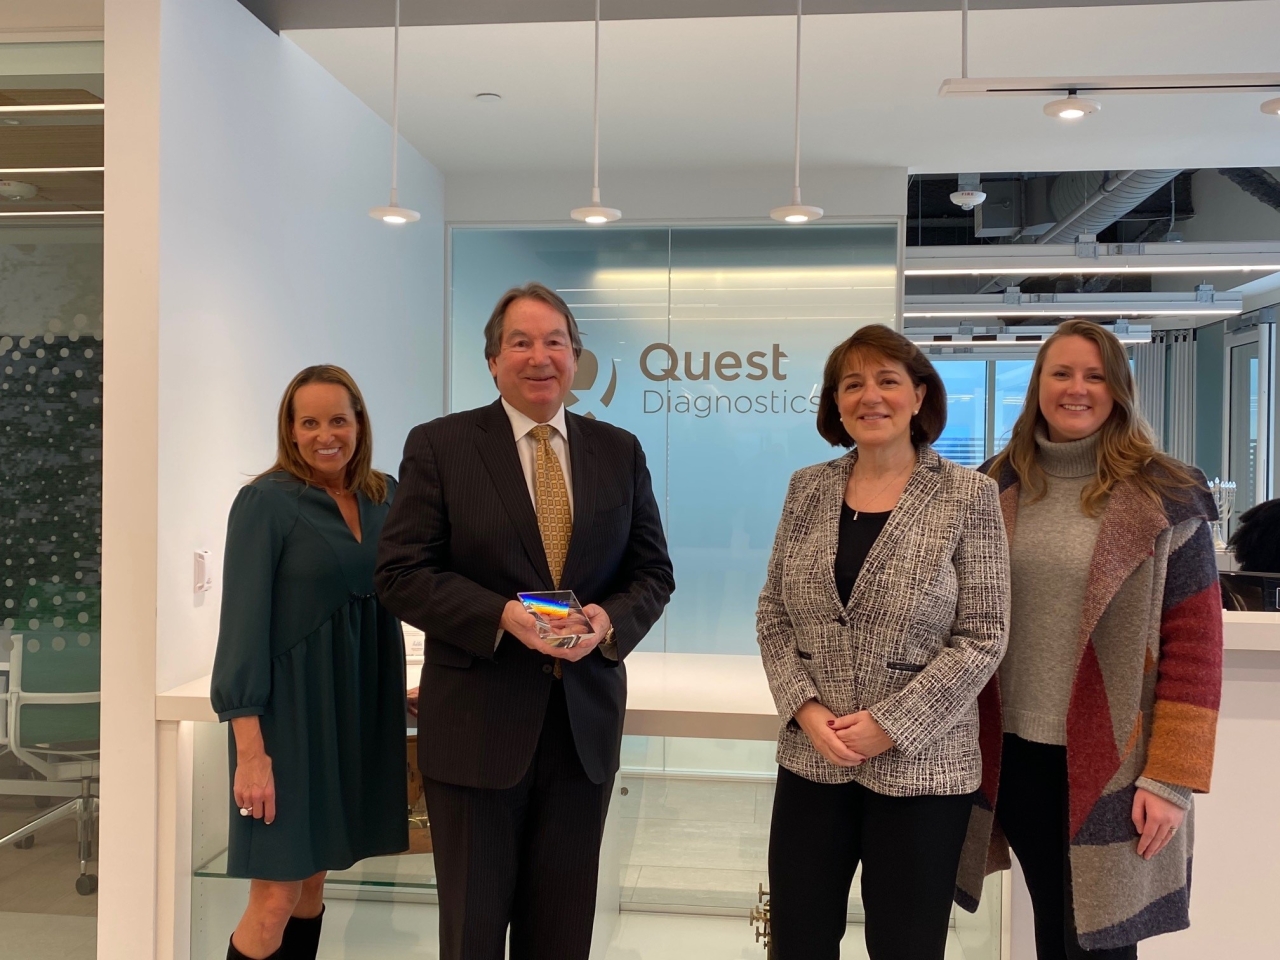 4 people standing in front of Quest Diagnostics logo